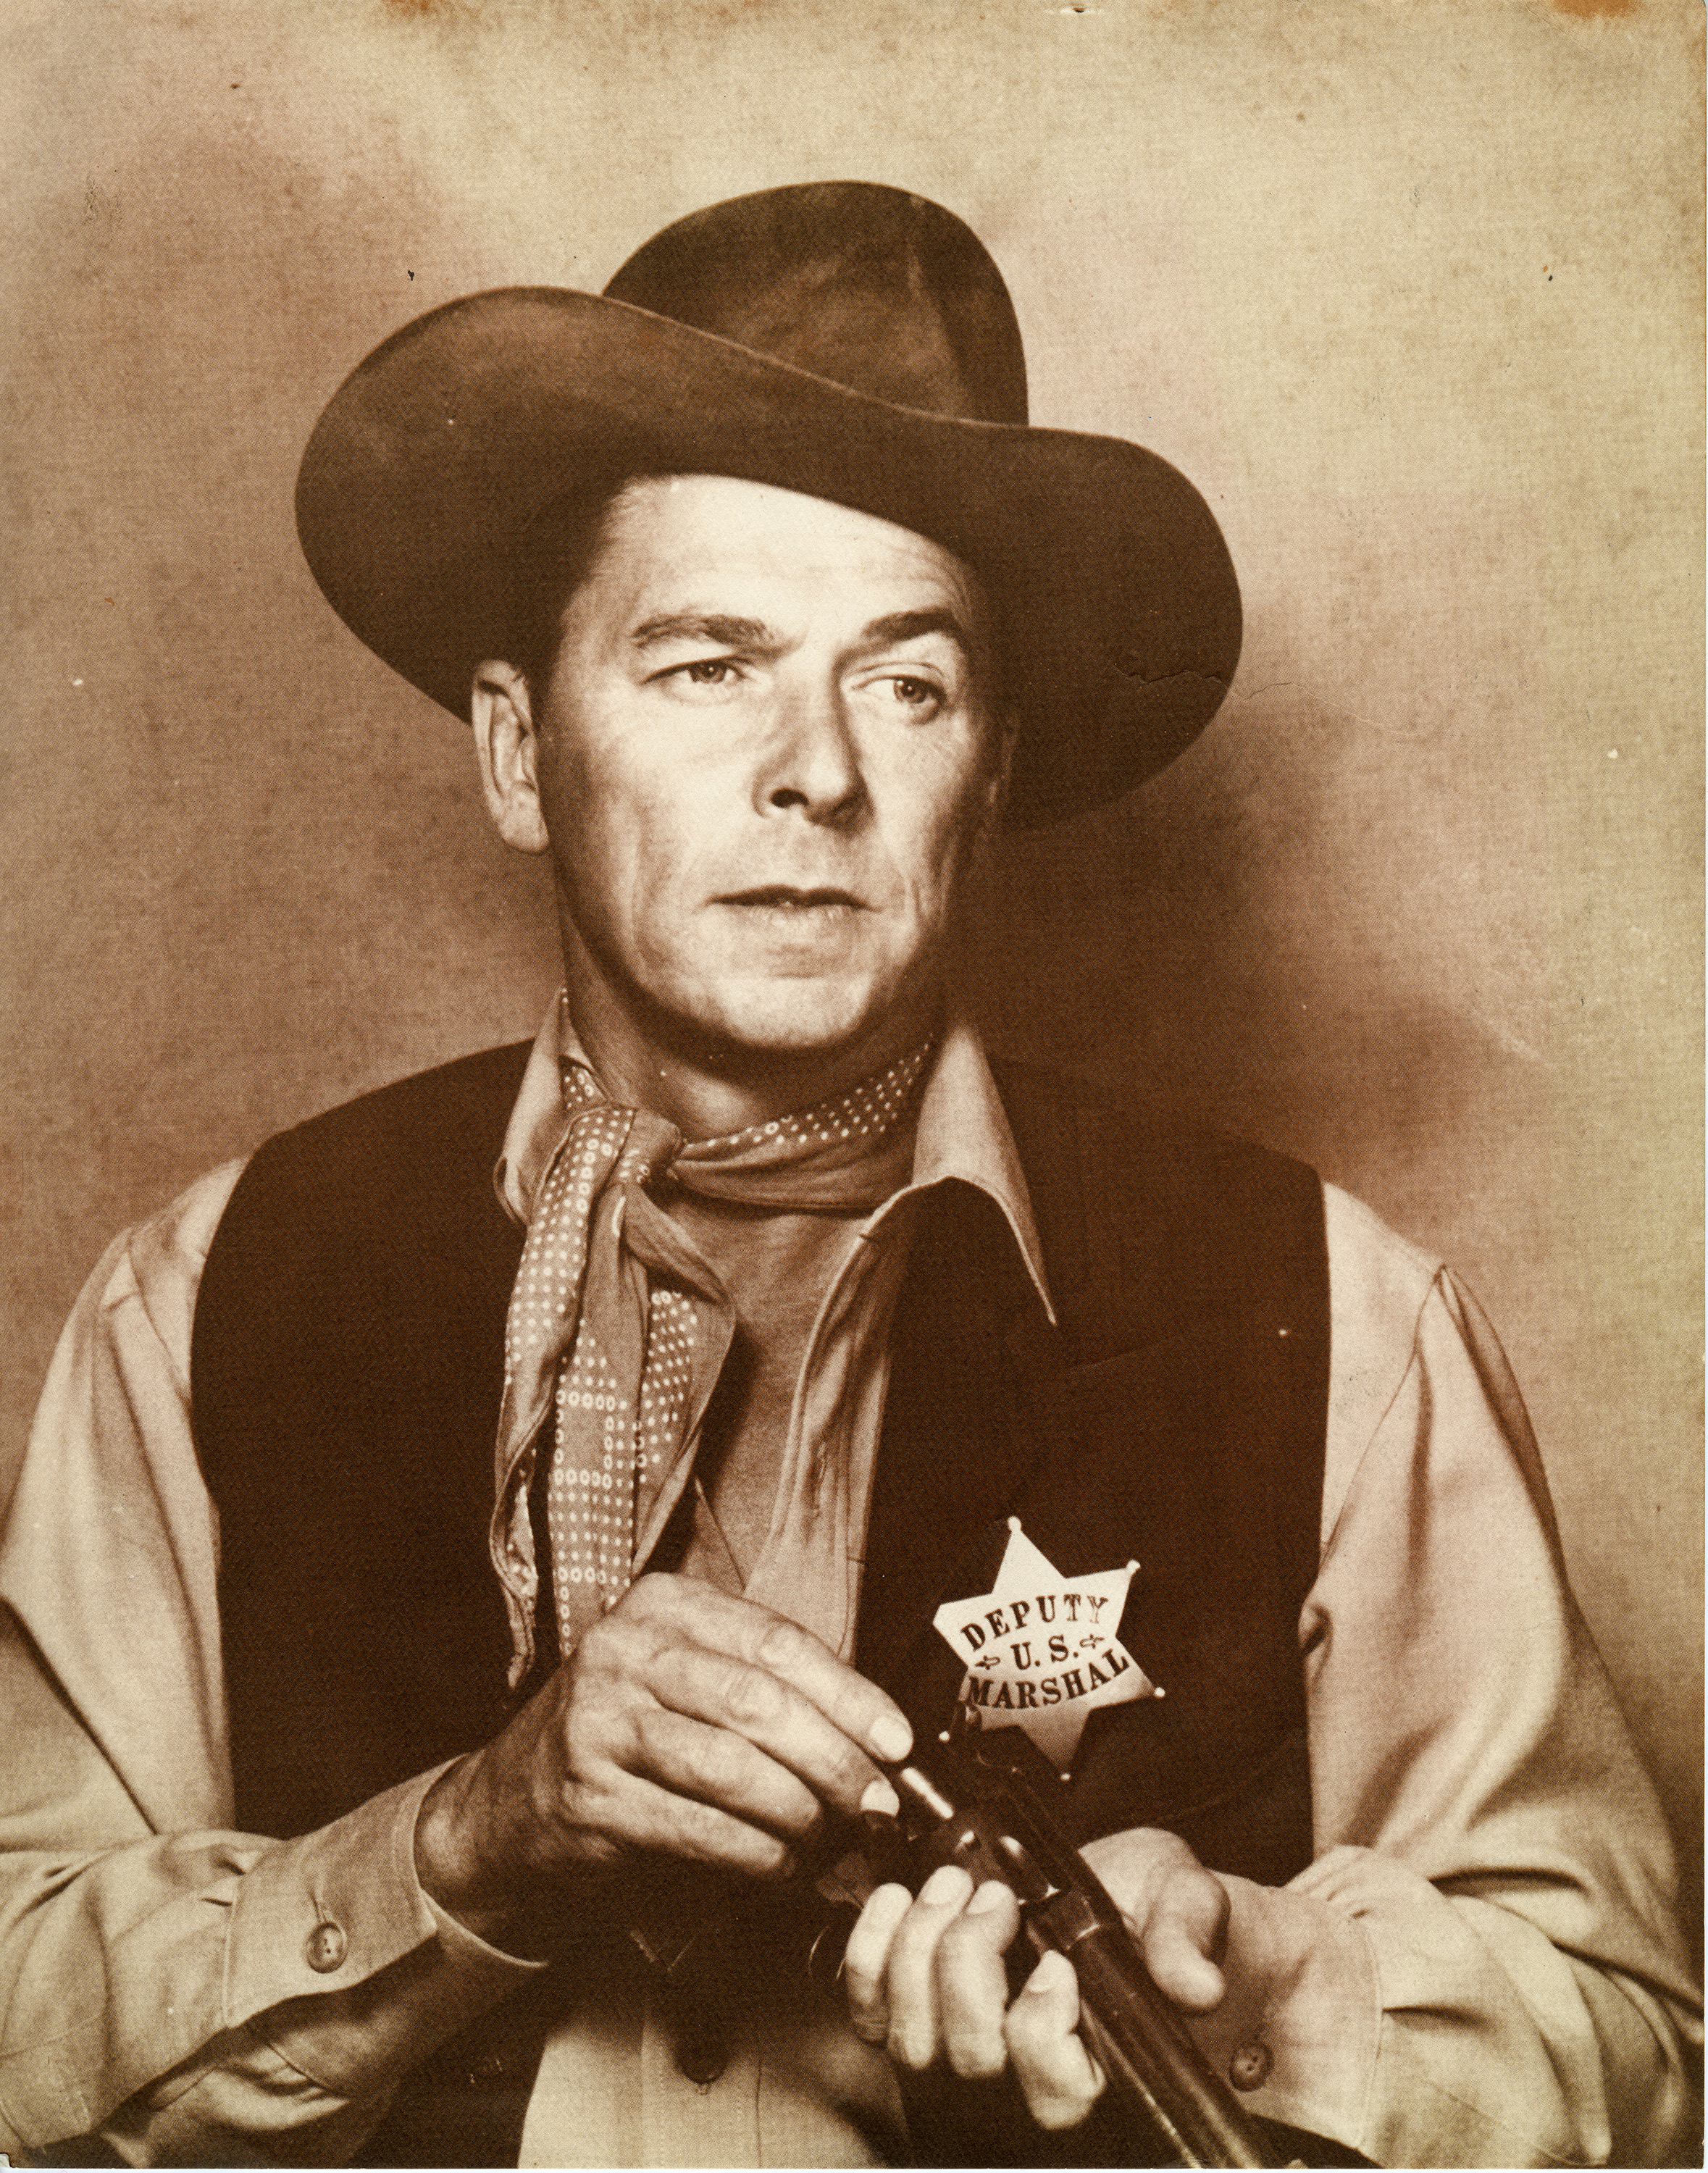 Ronald Reagan (lithograph) in the film “Law and Order”